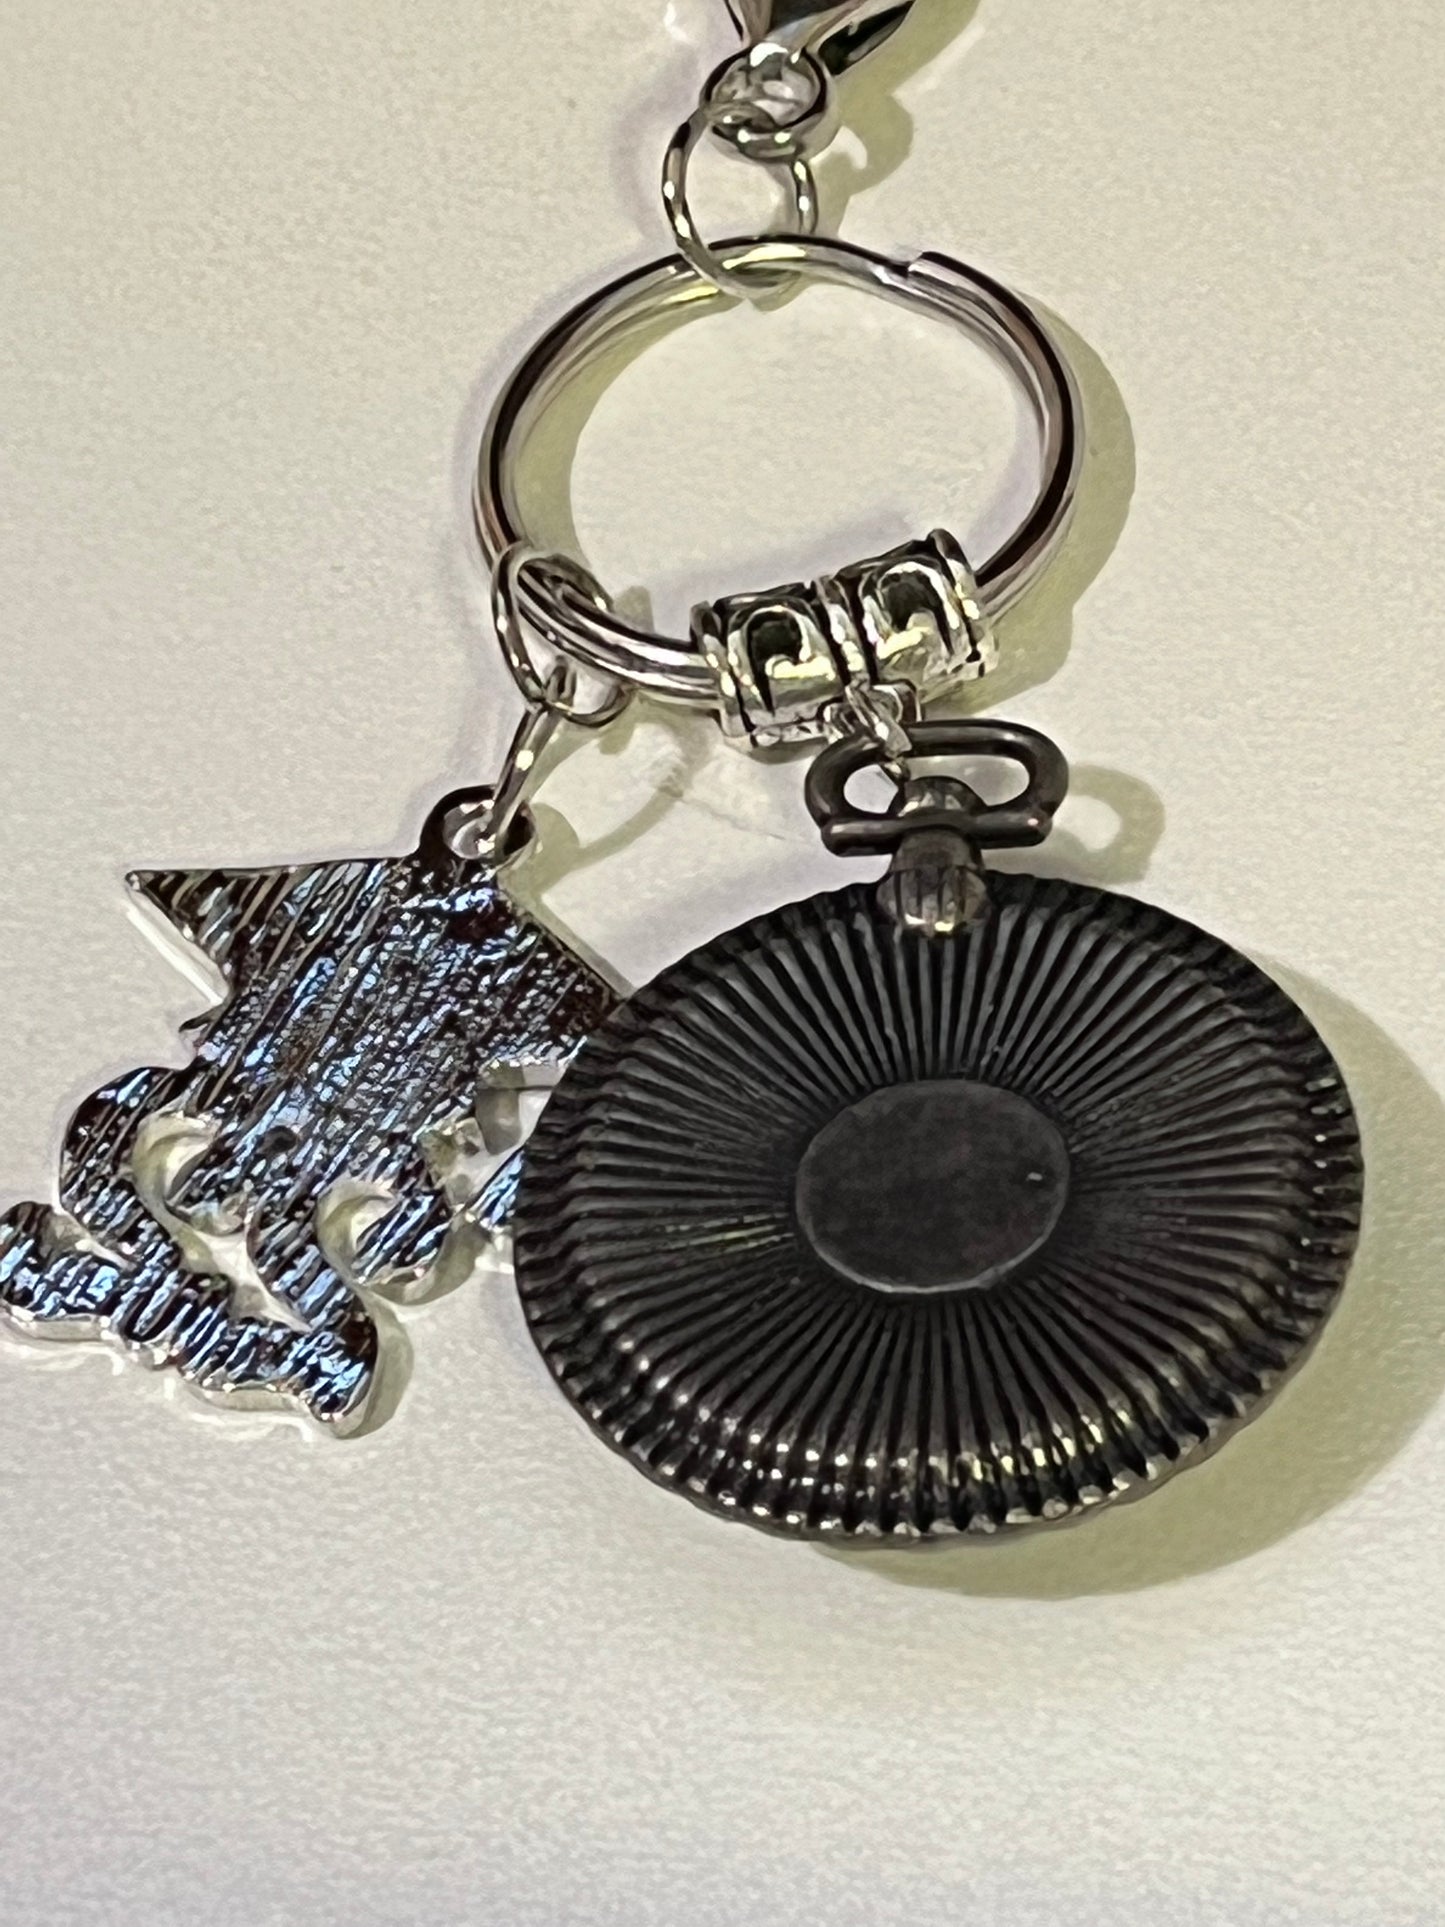 Graduation Key Chain, Grad gifts THE TASSEL WAS WORTH THE HASSLE